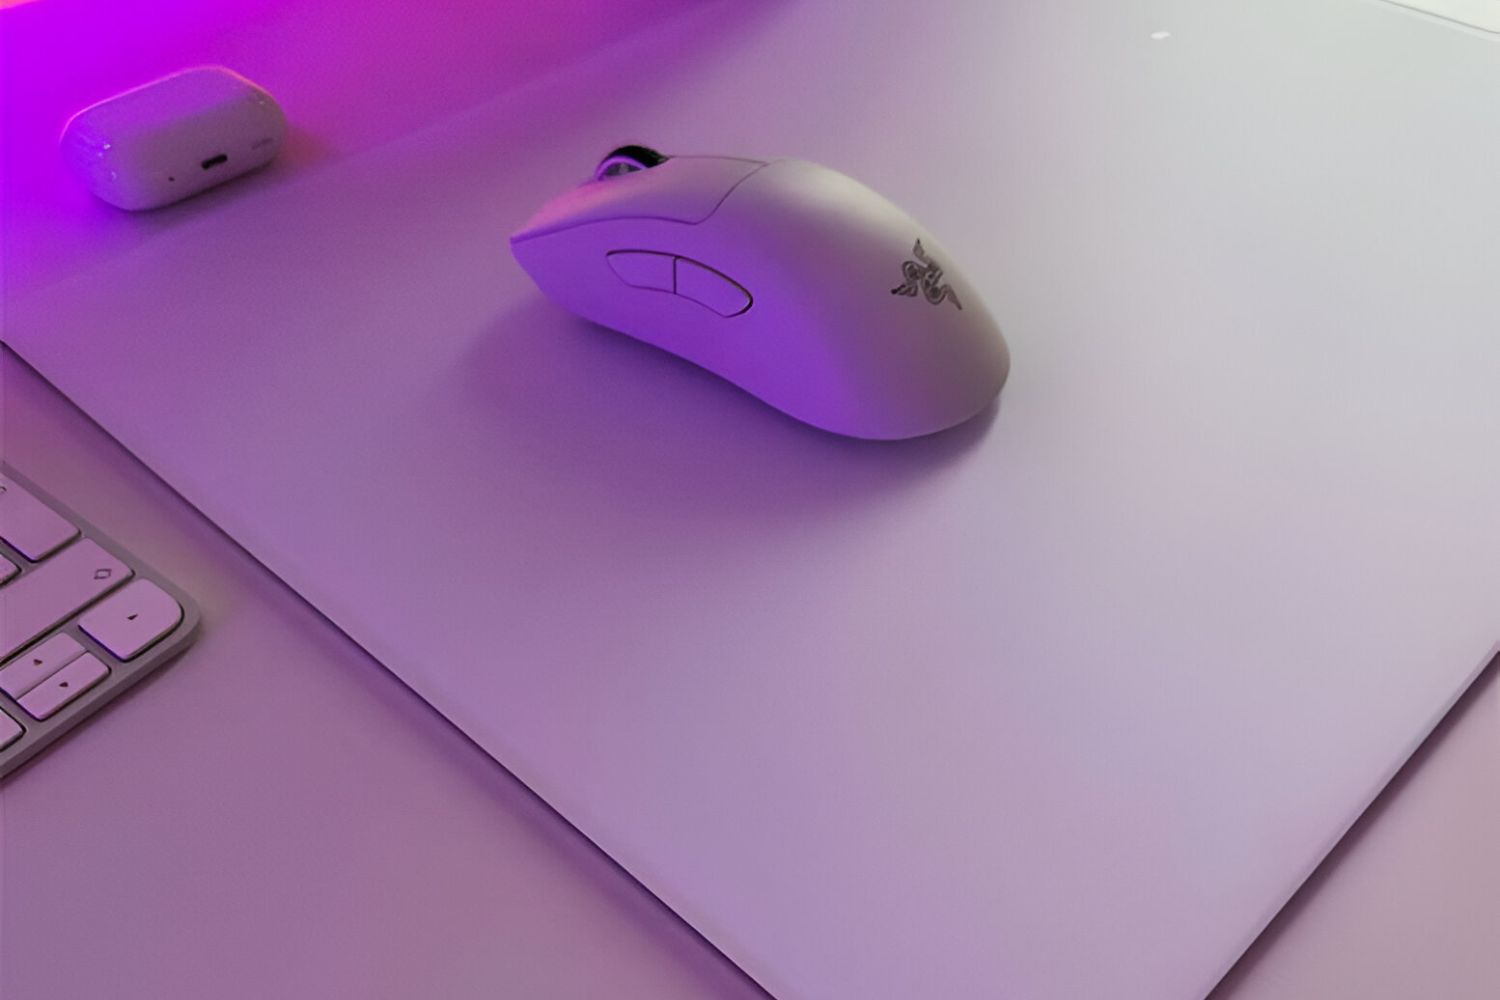 How To Smooth A Worn Mouse Pad